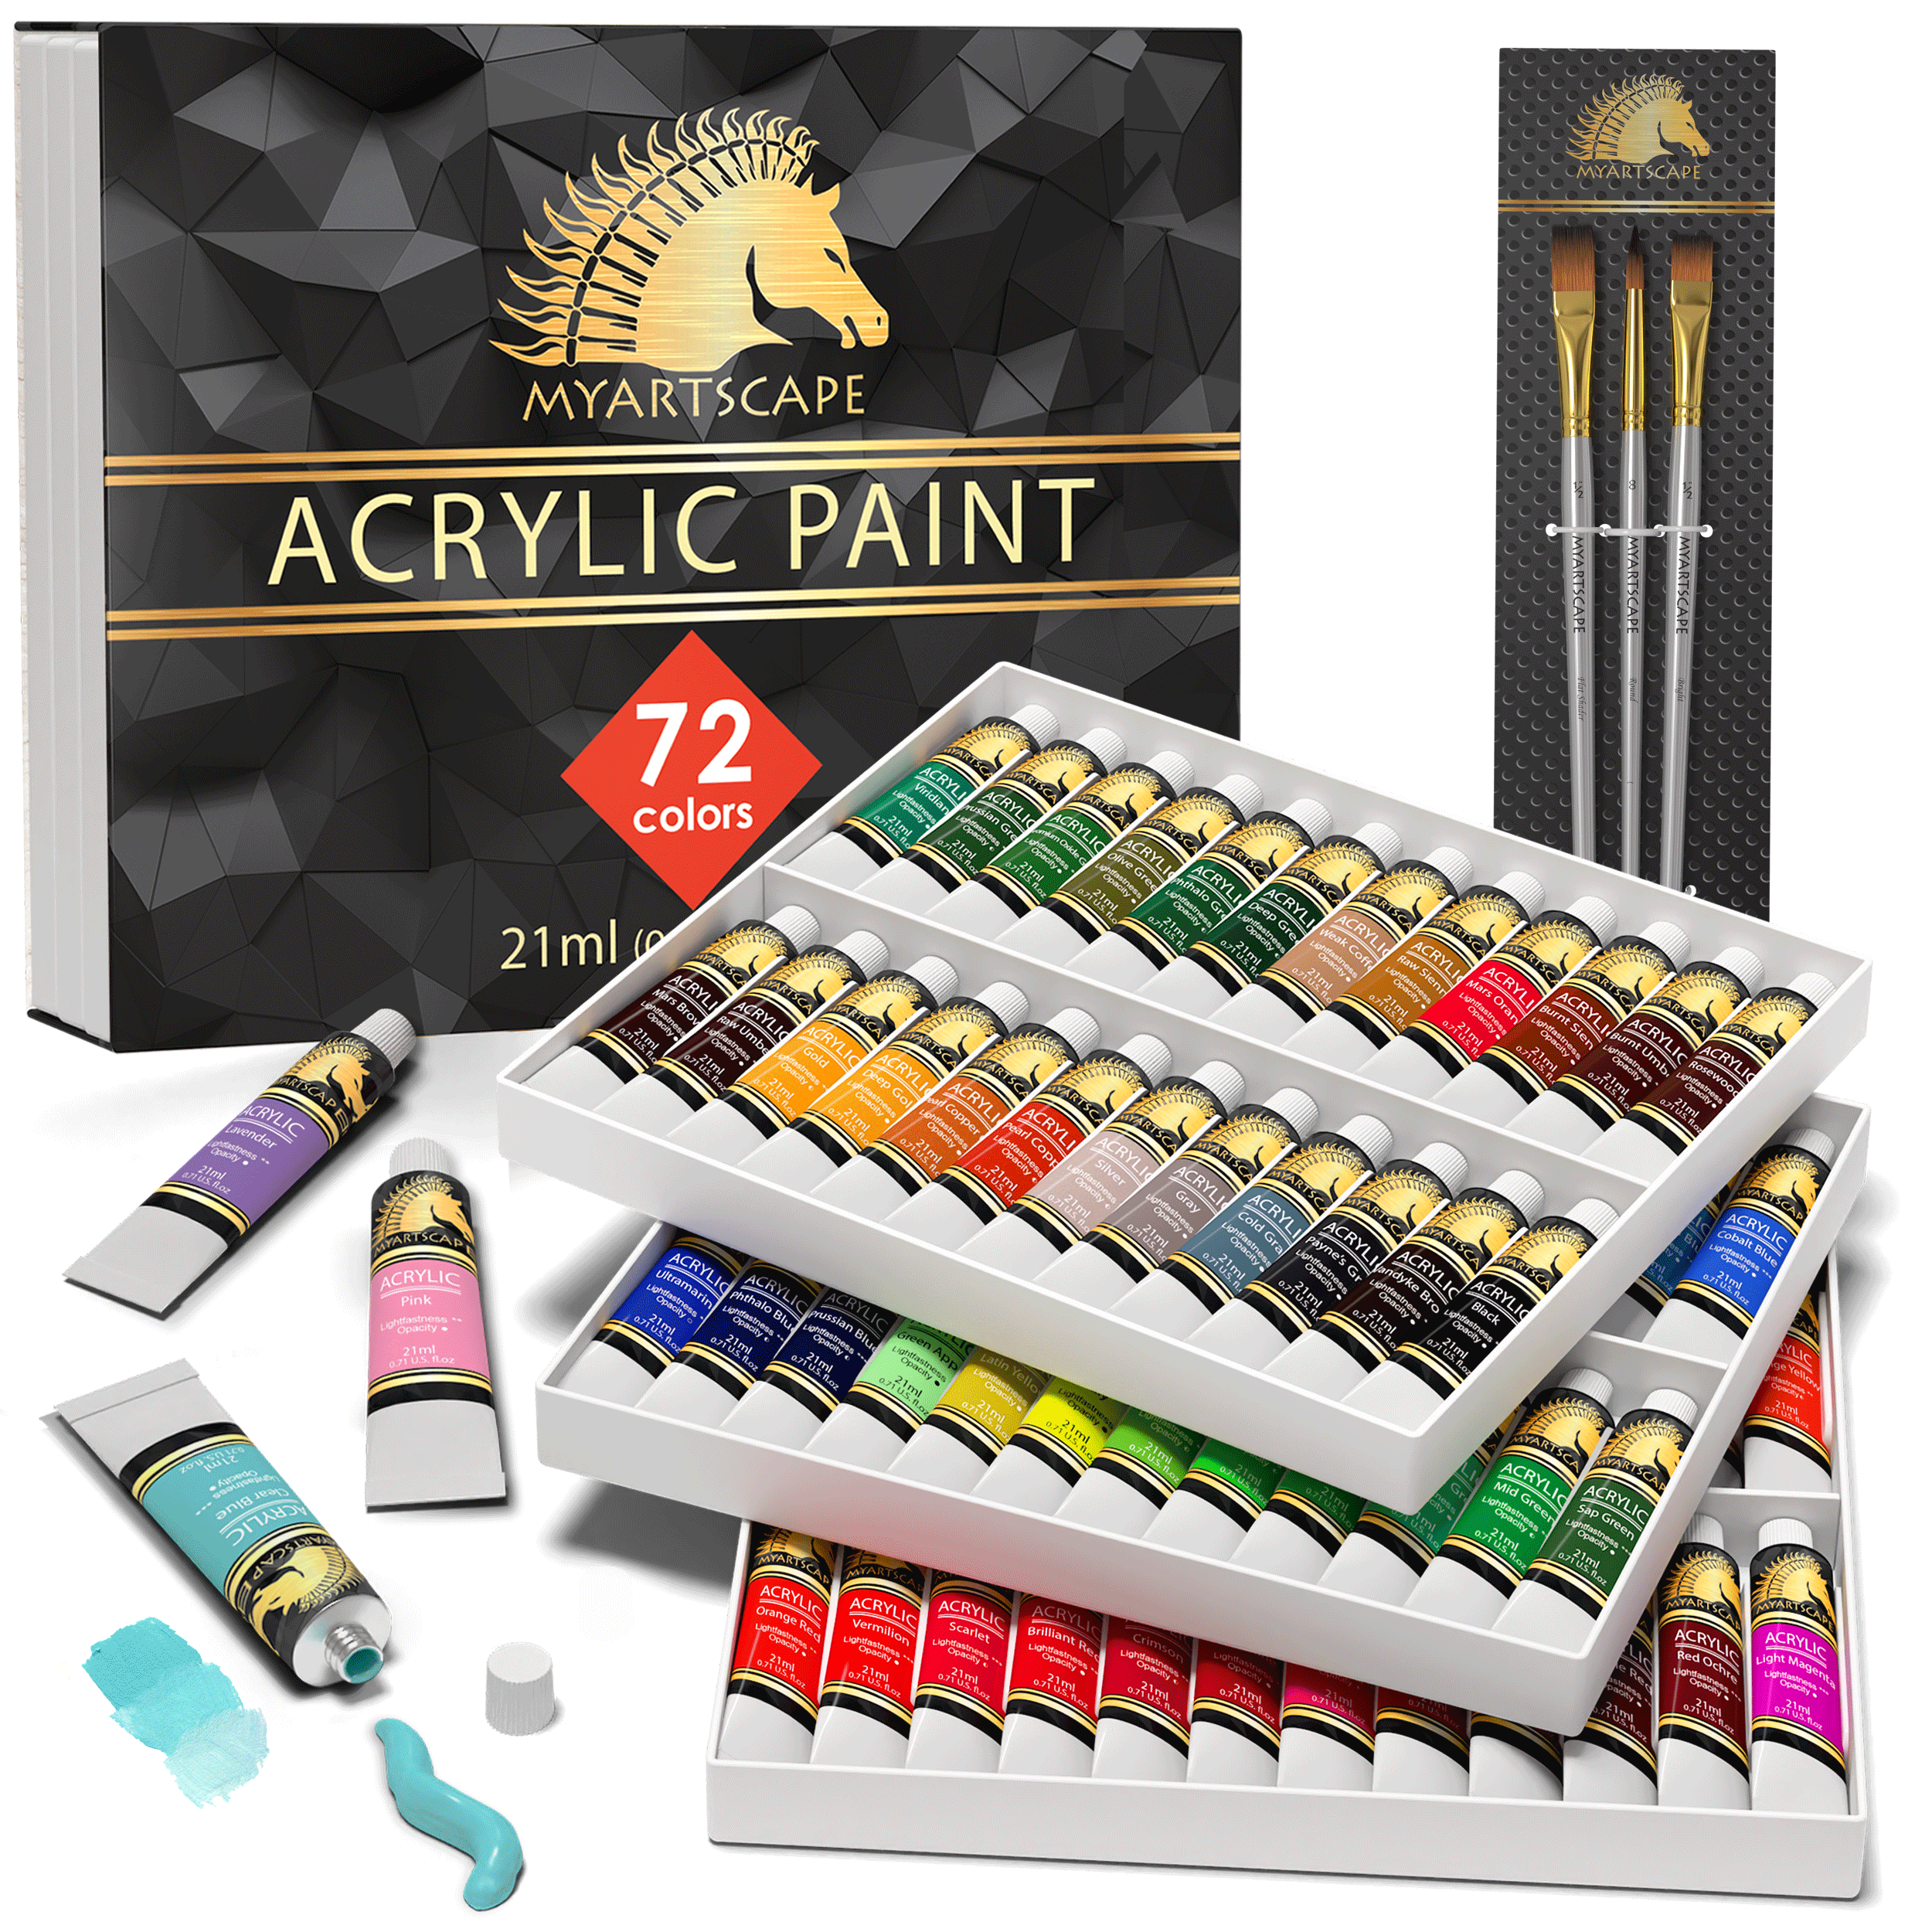 72 Color Set of Acrylic Paint in Large 18ml Tubes - Rich Vivid